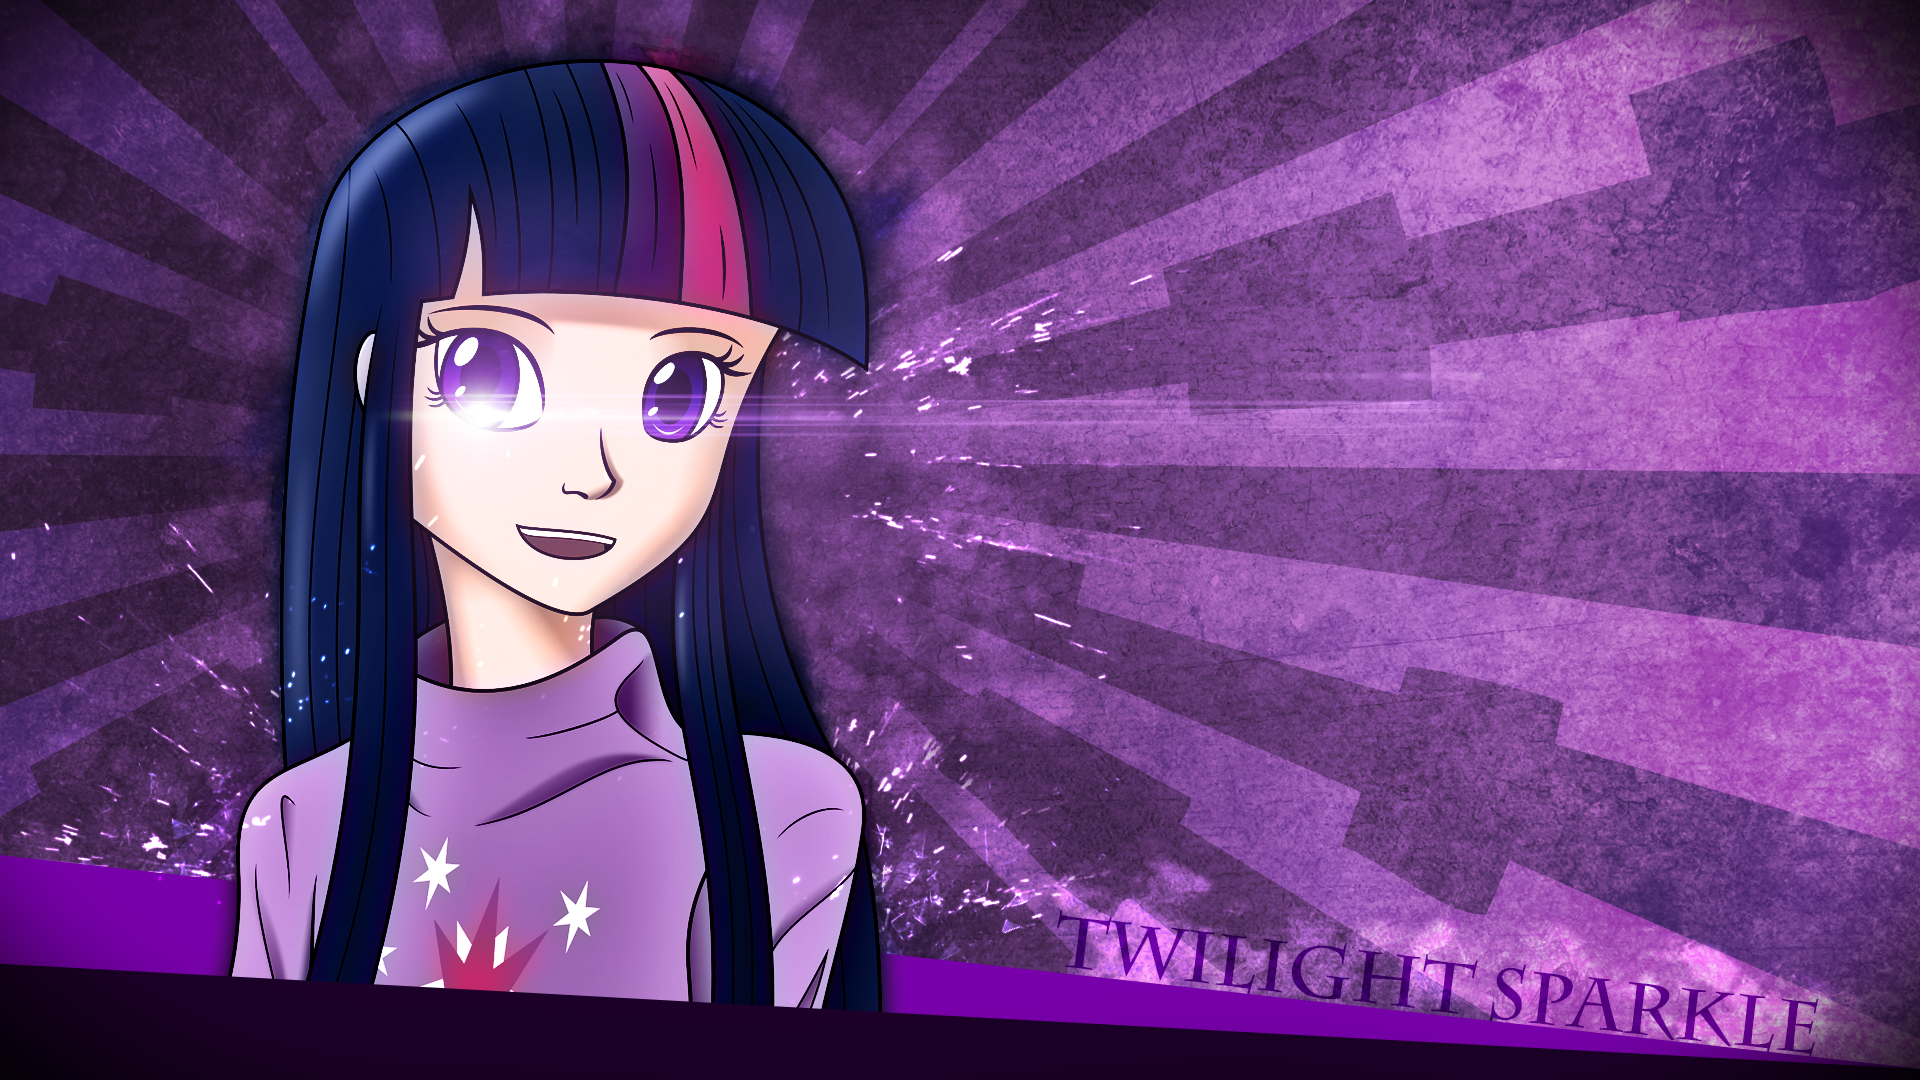 Just Twilight by johnjoseco, Karl97 and Mamandil